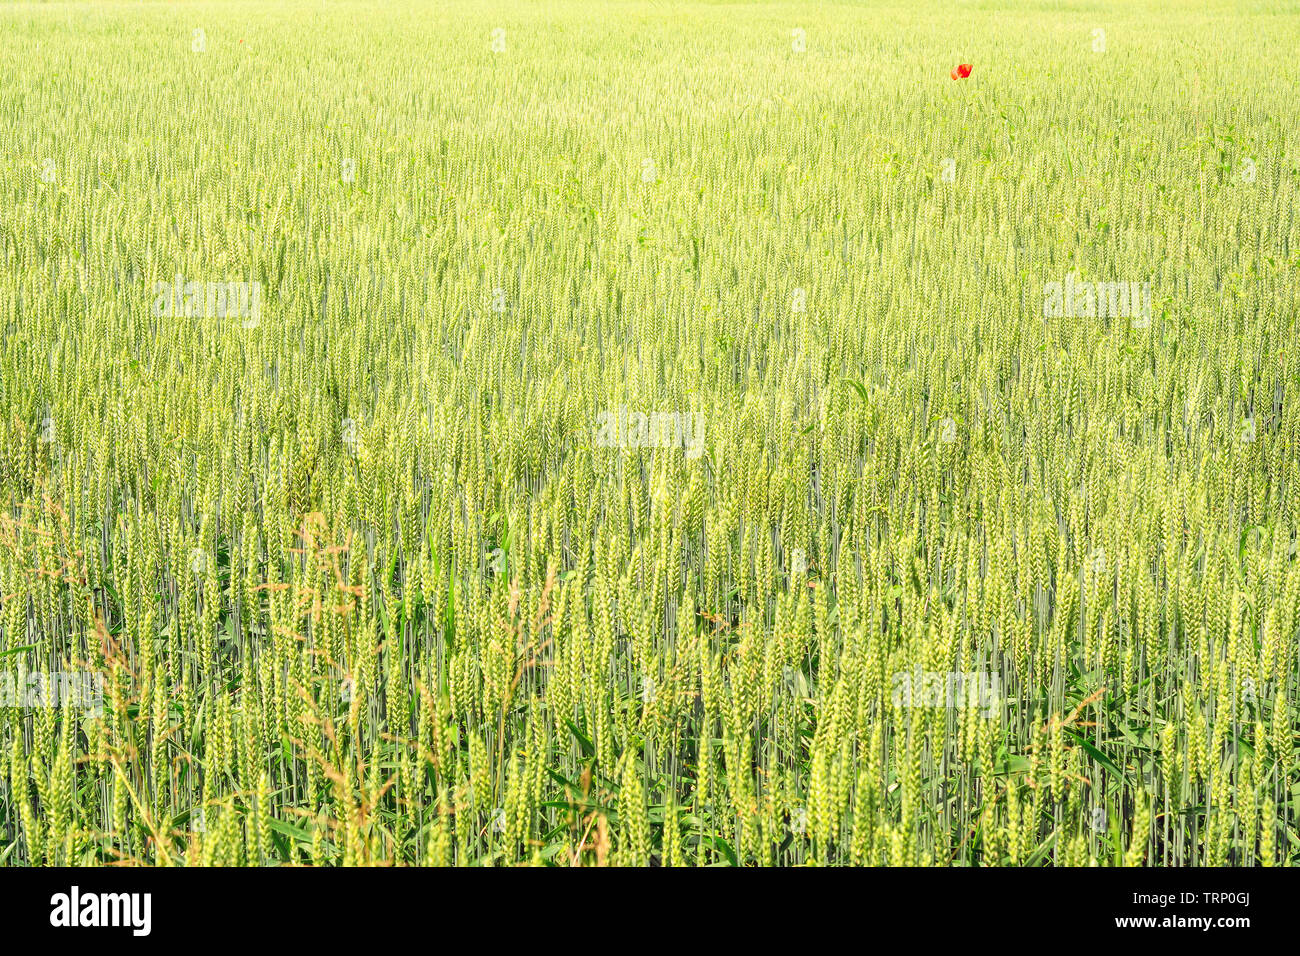 wheat field background with red poppies Stock Photo